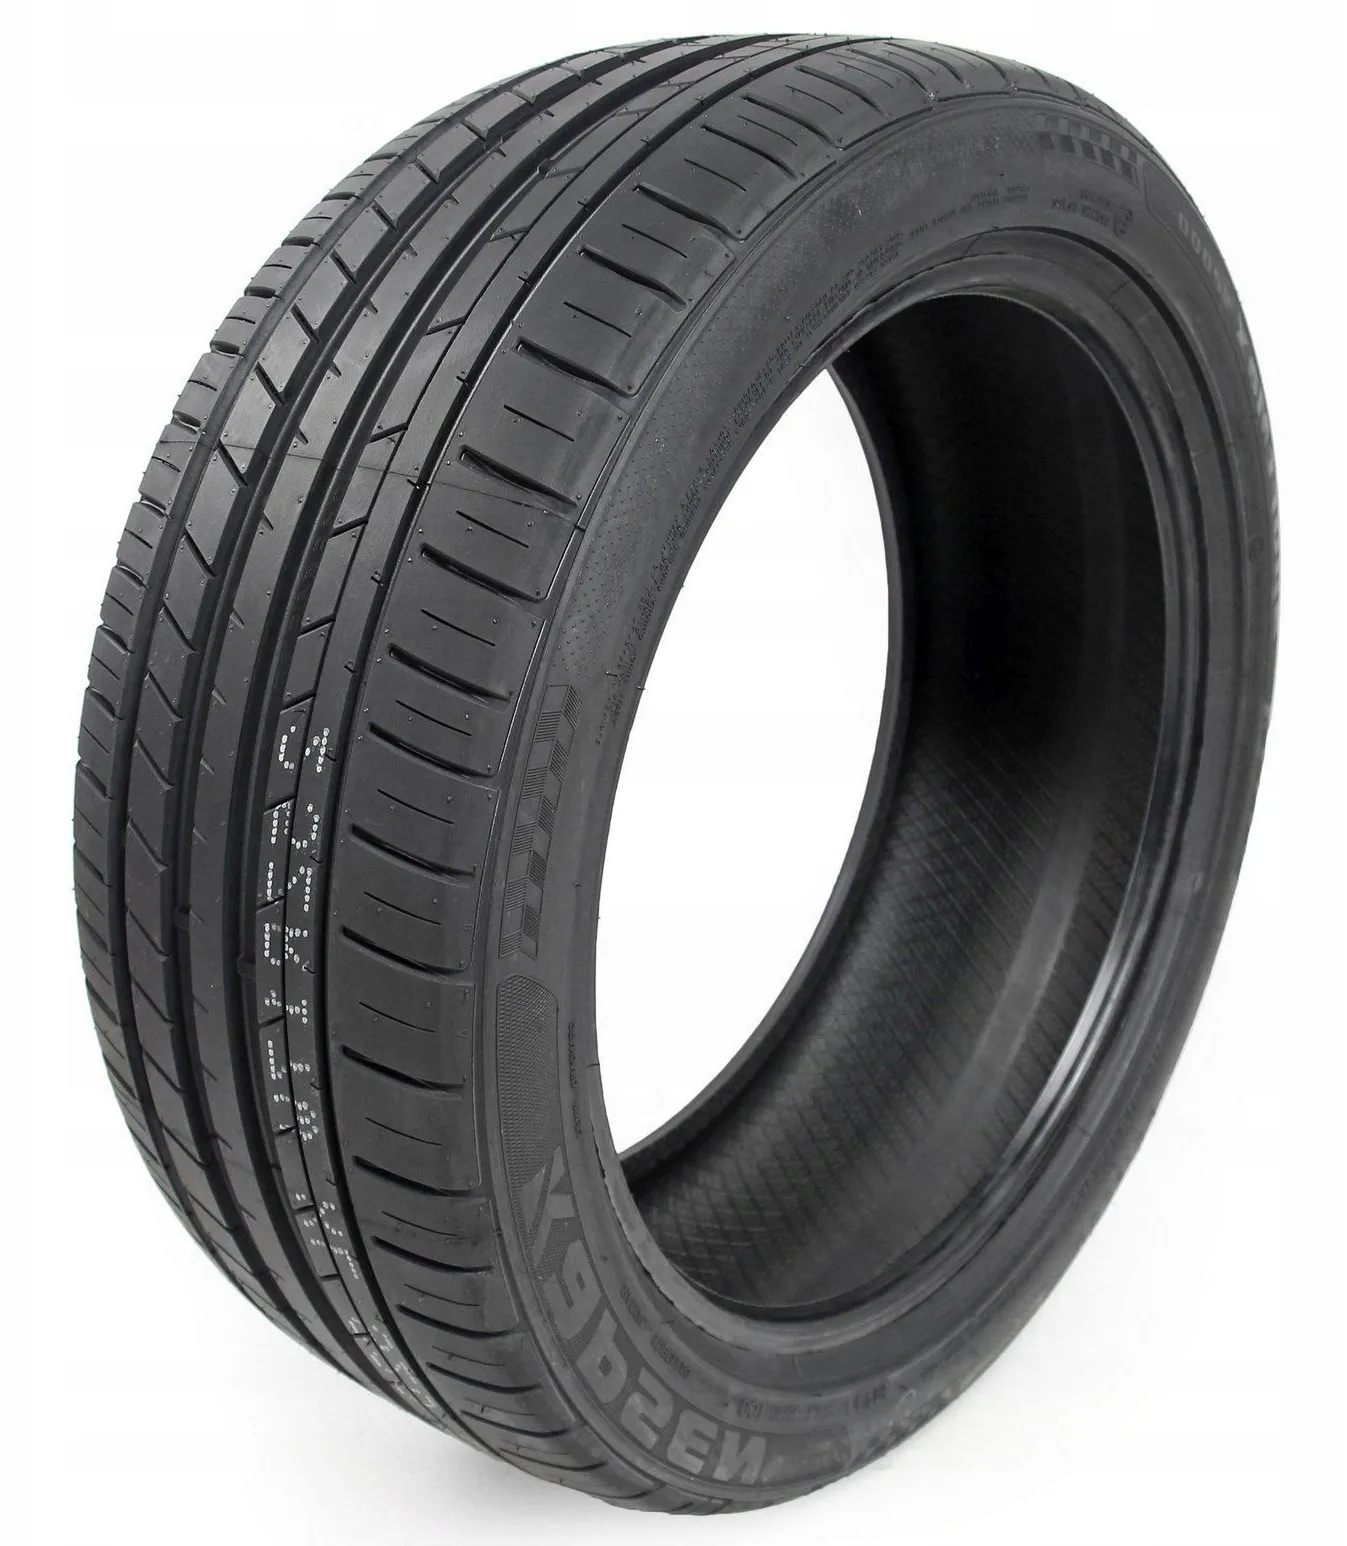 "Wheel Wisely: Dive into Wholesale Prices on Premium Used Tires Act Fast!"